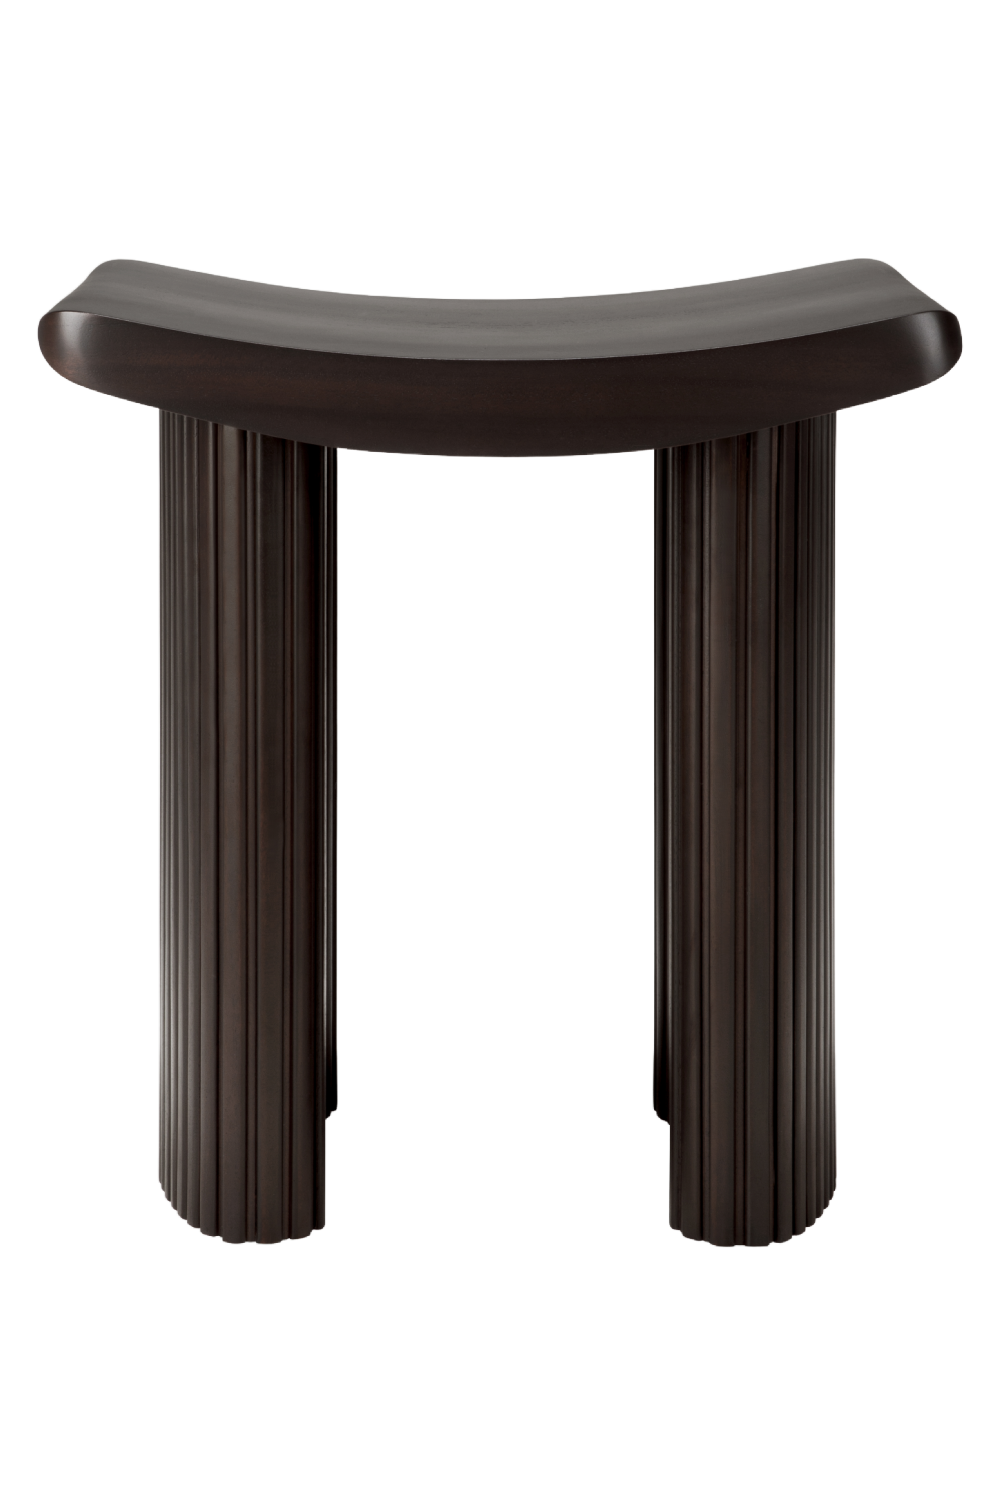 Brown Mahogany Curved Stool | Ethnicraft Roller Max | Oroa.com